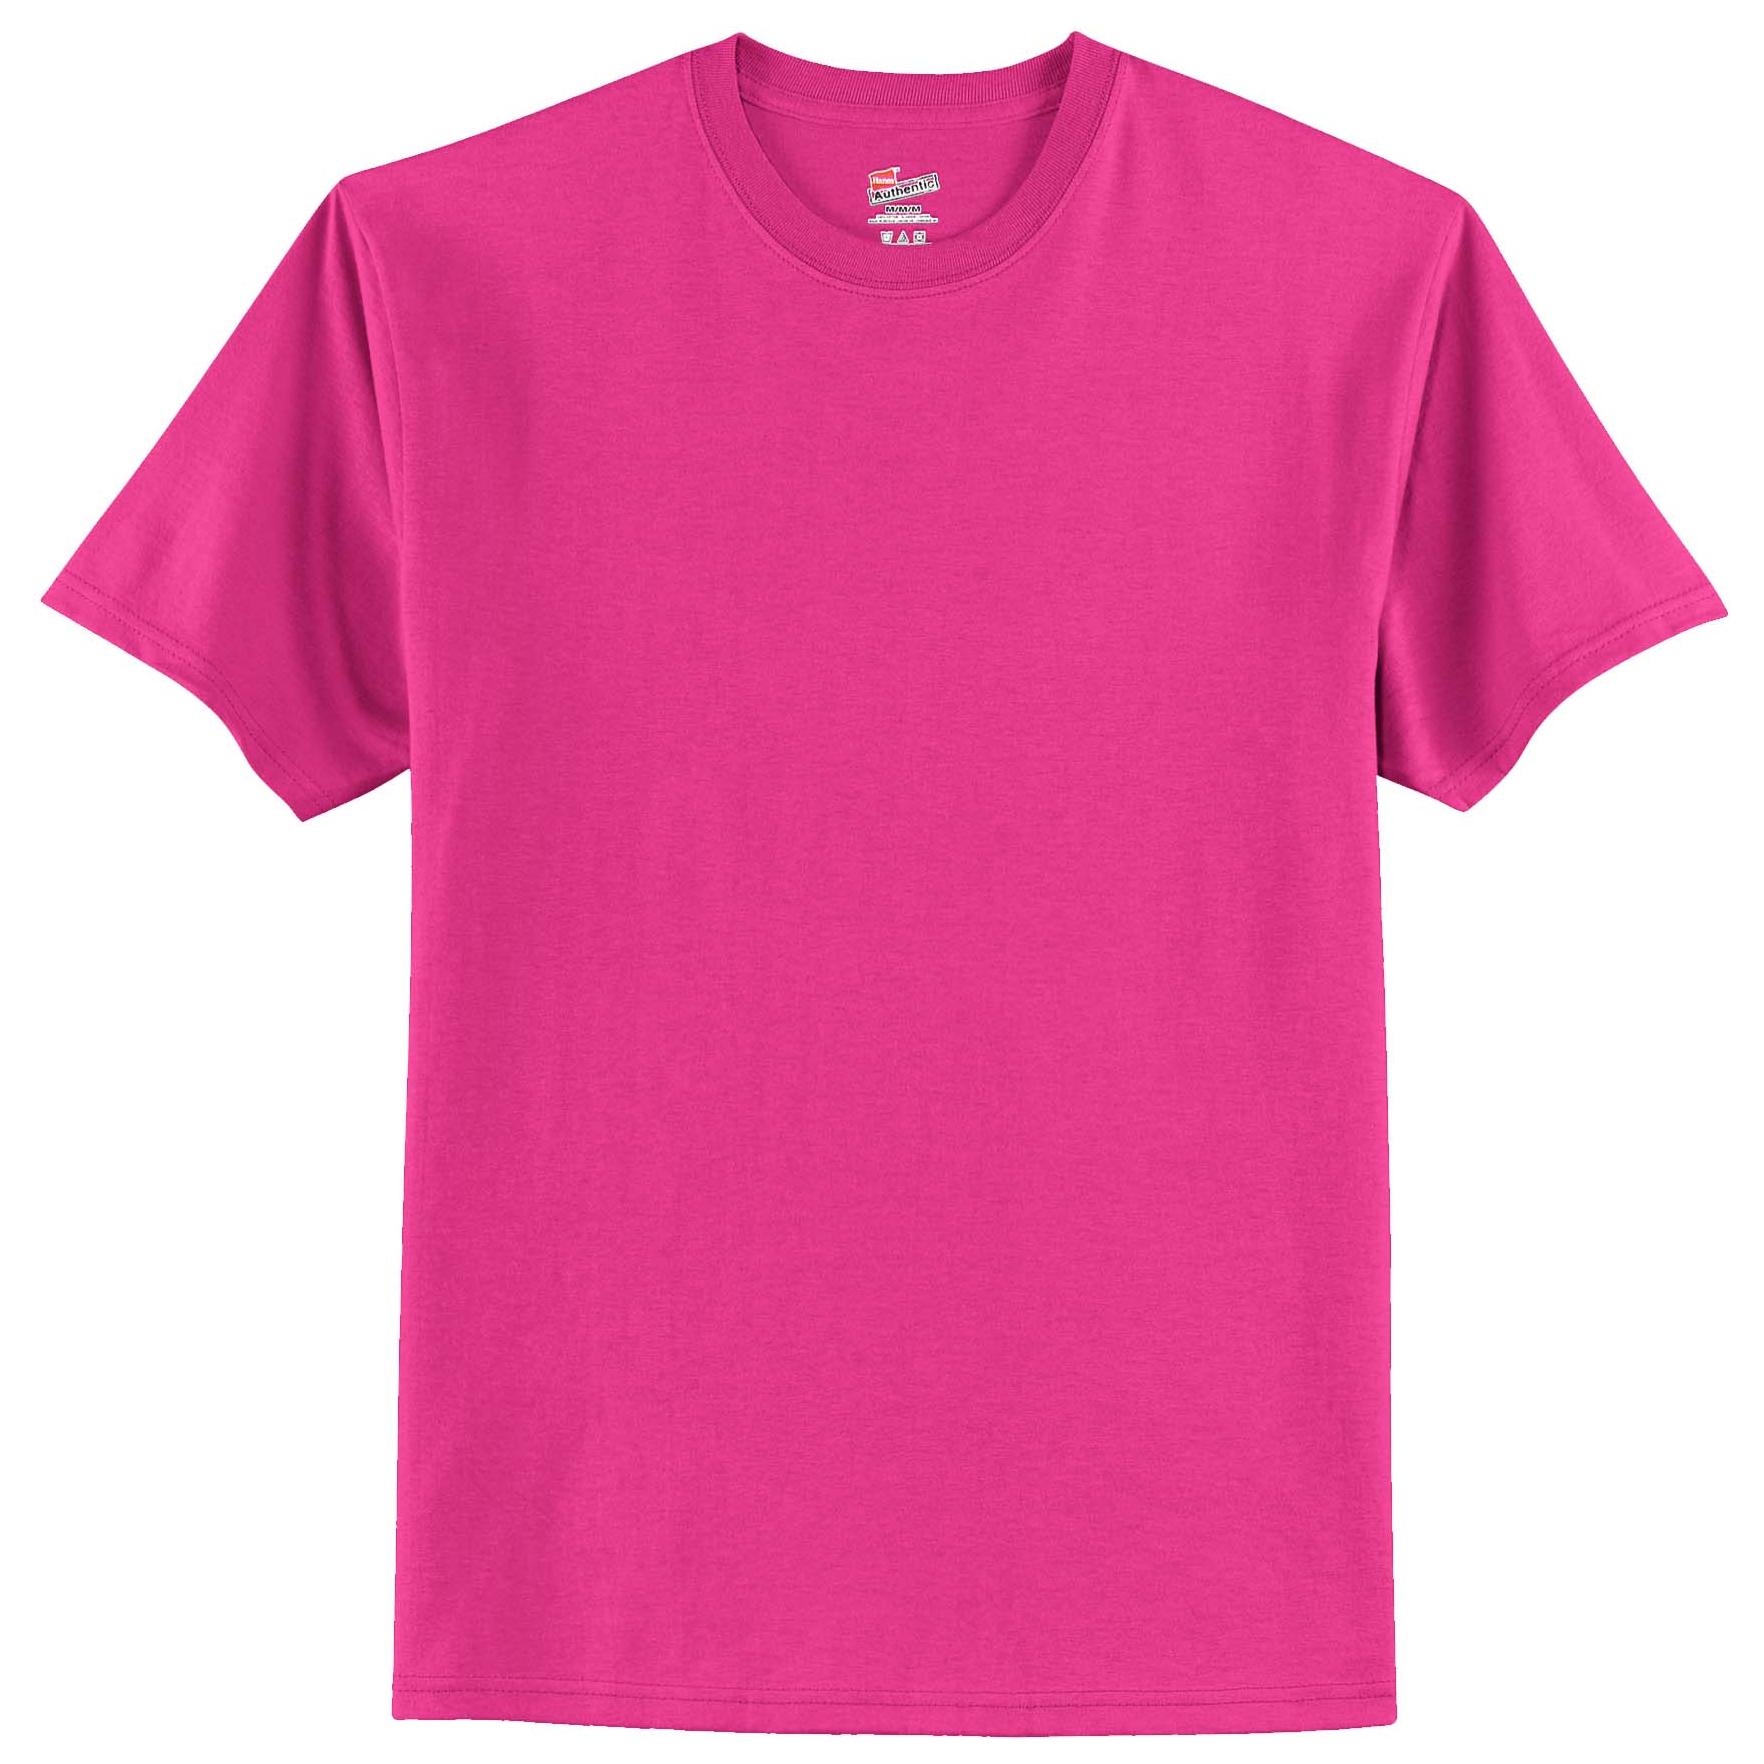  Hanes Women's Polyester Cool Dri T-Shirt - WOW PINK - X-Large :  Clothing, Shoes & Jewelry